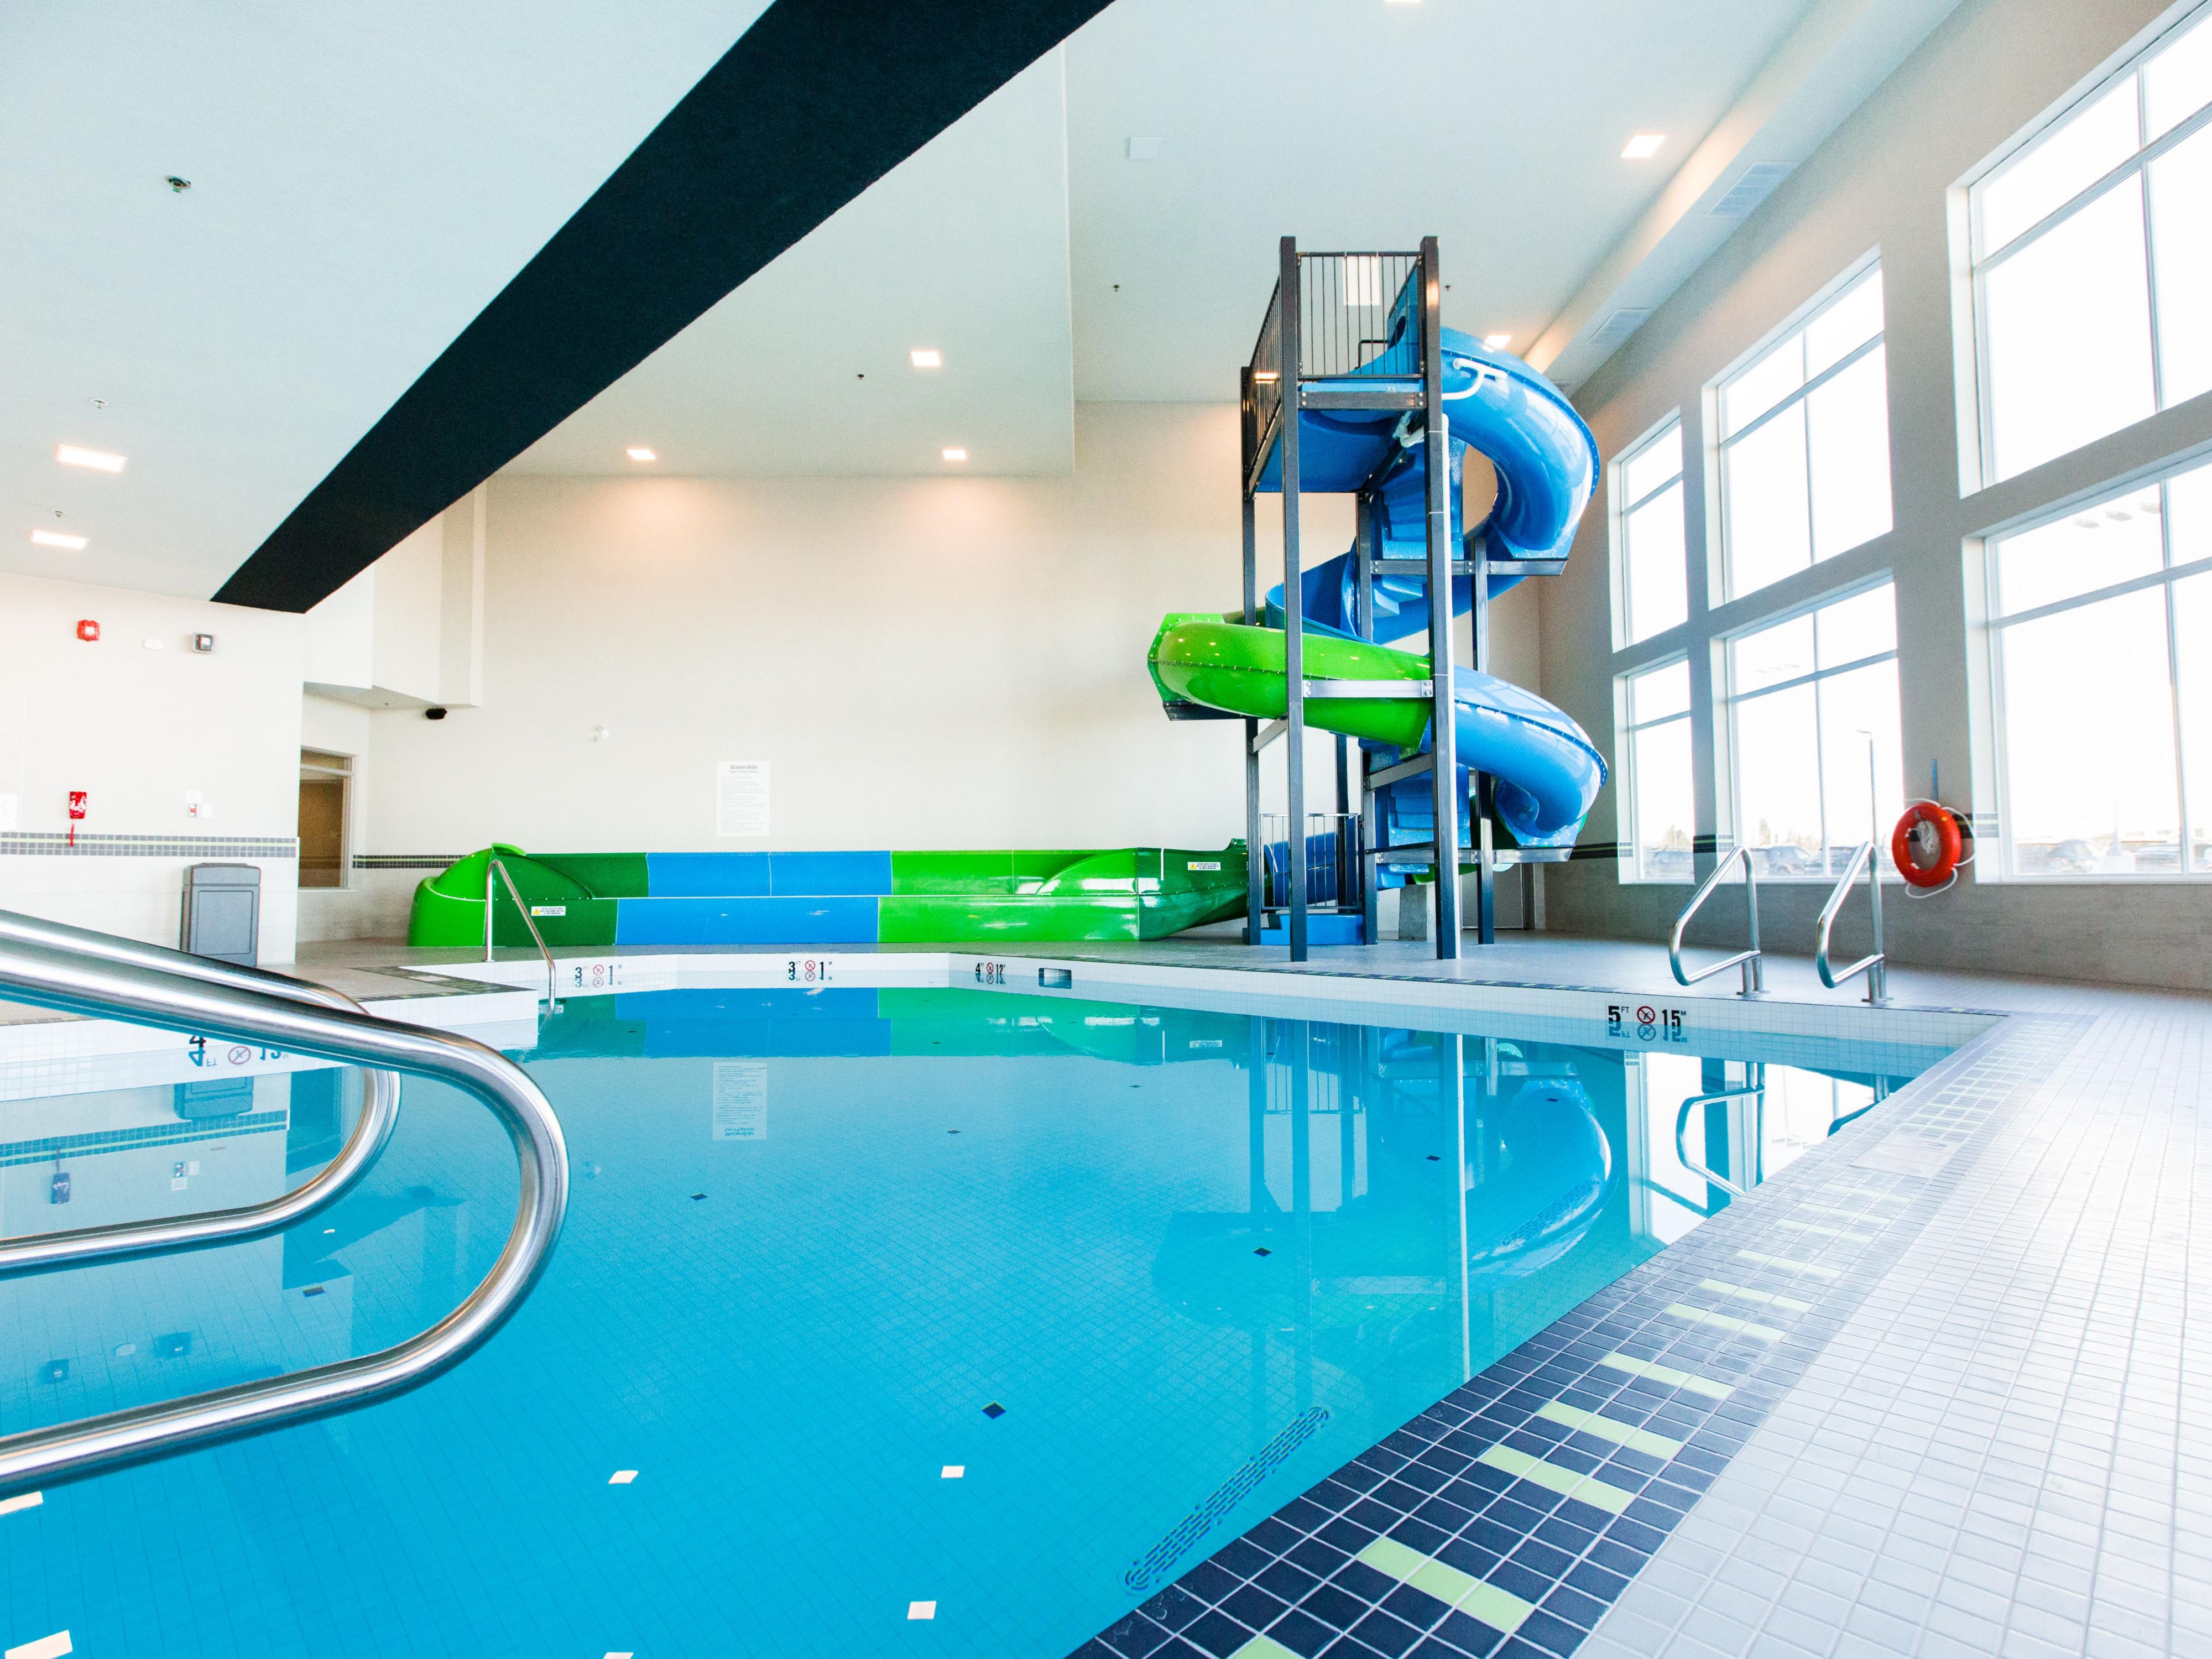 Unwind in our indoor pool and hot tub and have some fun on our waterslide!